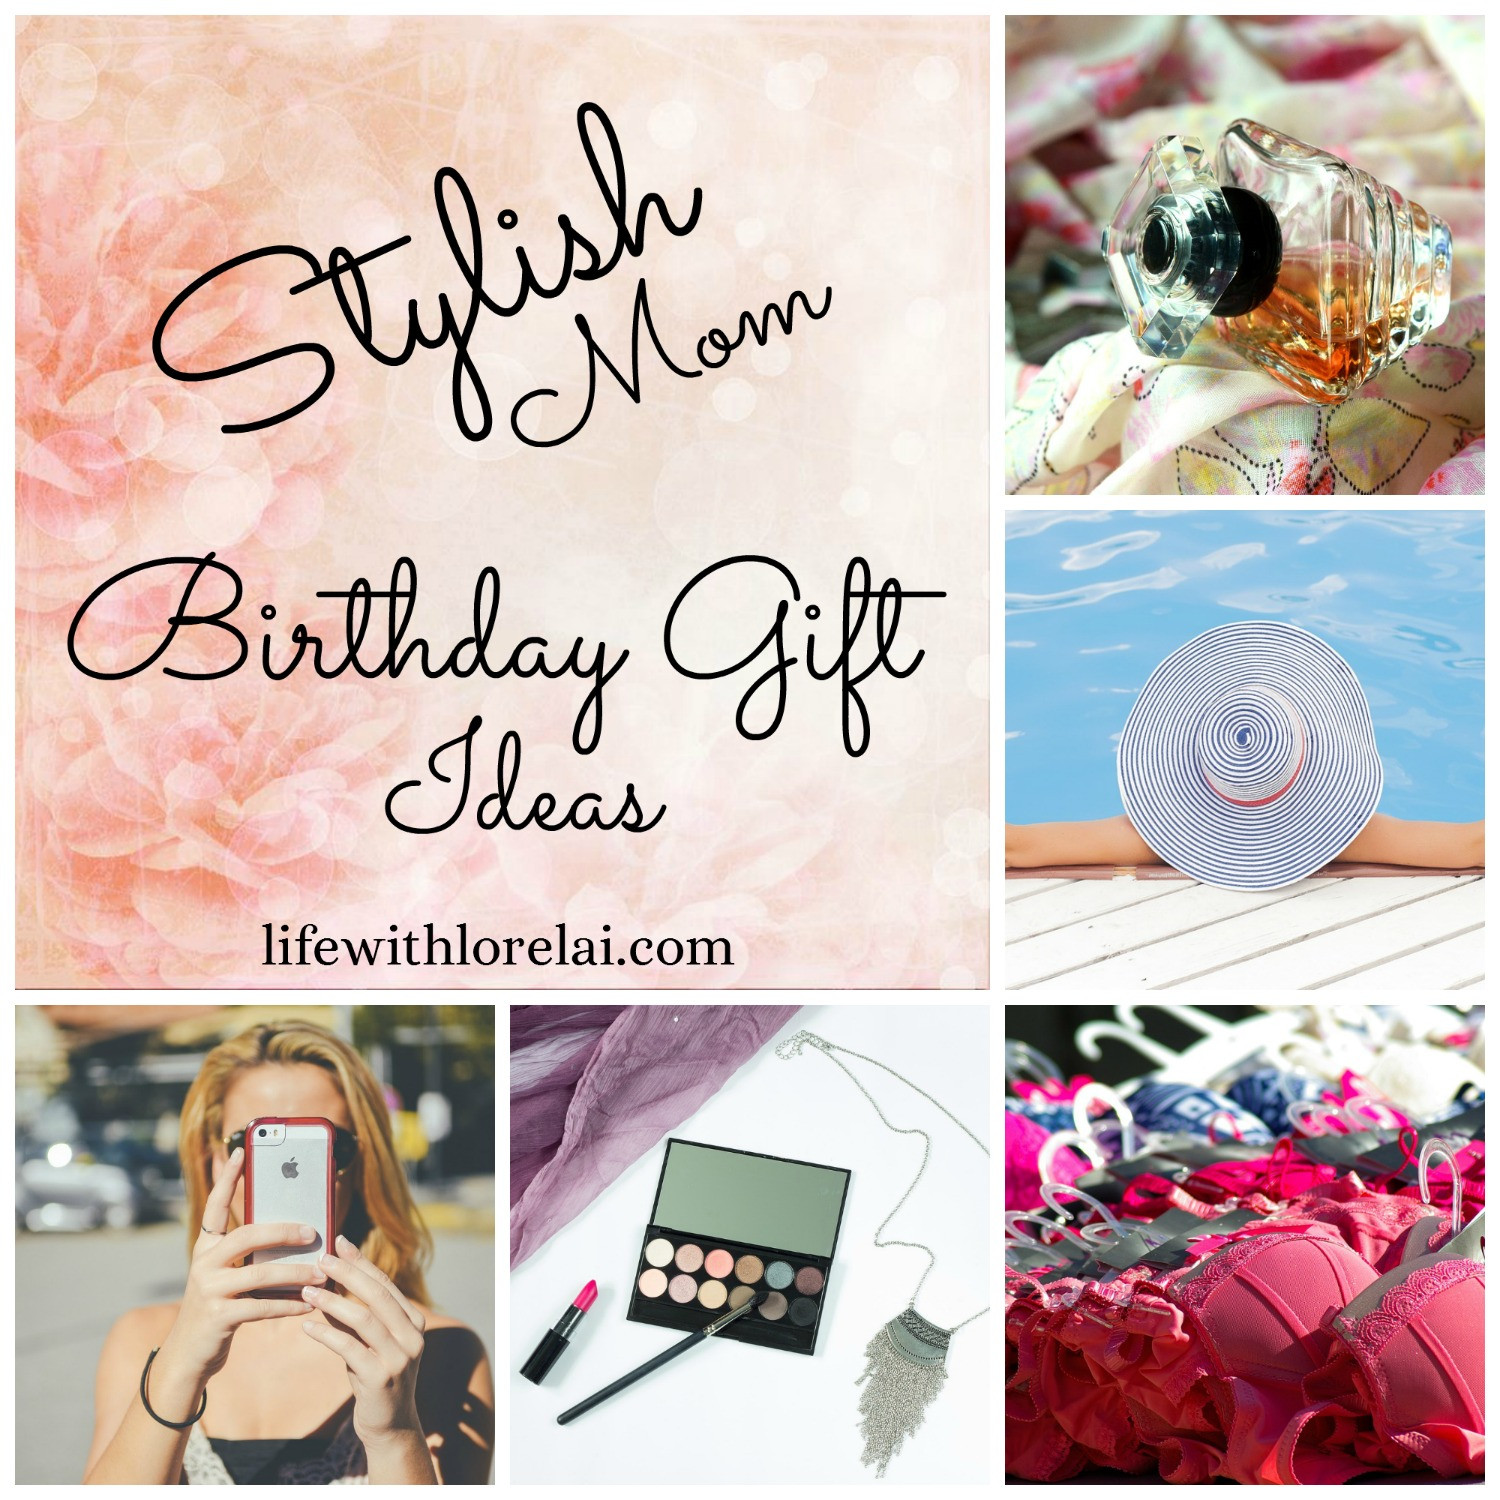 Birthday Gifts For Moms
 Birthday Gift Ideas For The Stylish Mom Life With Lorelai